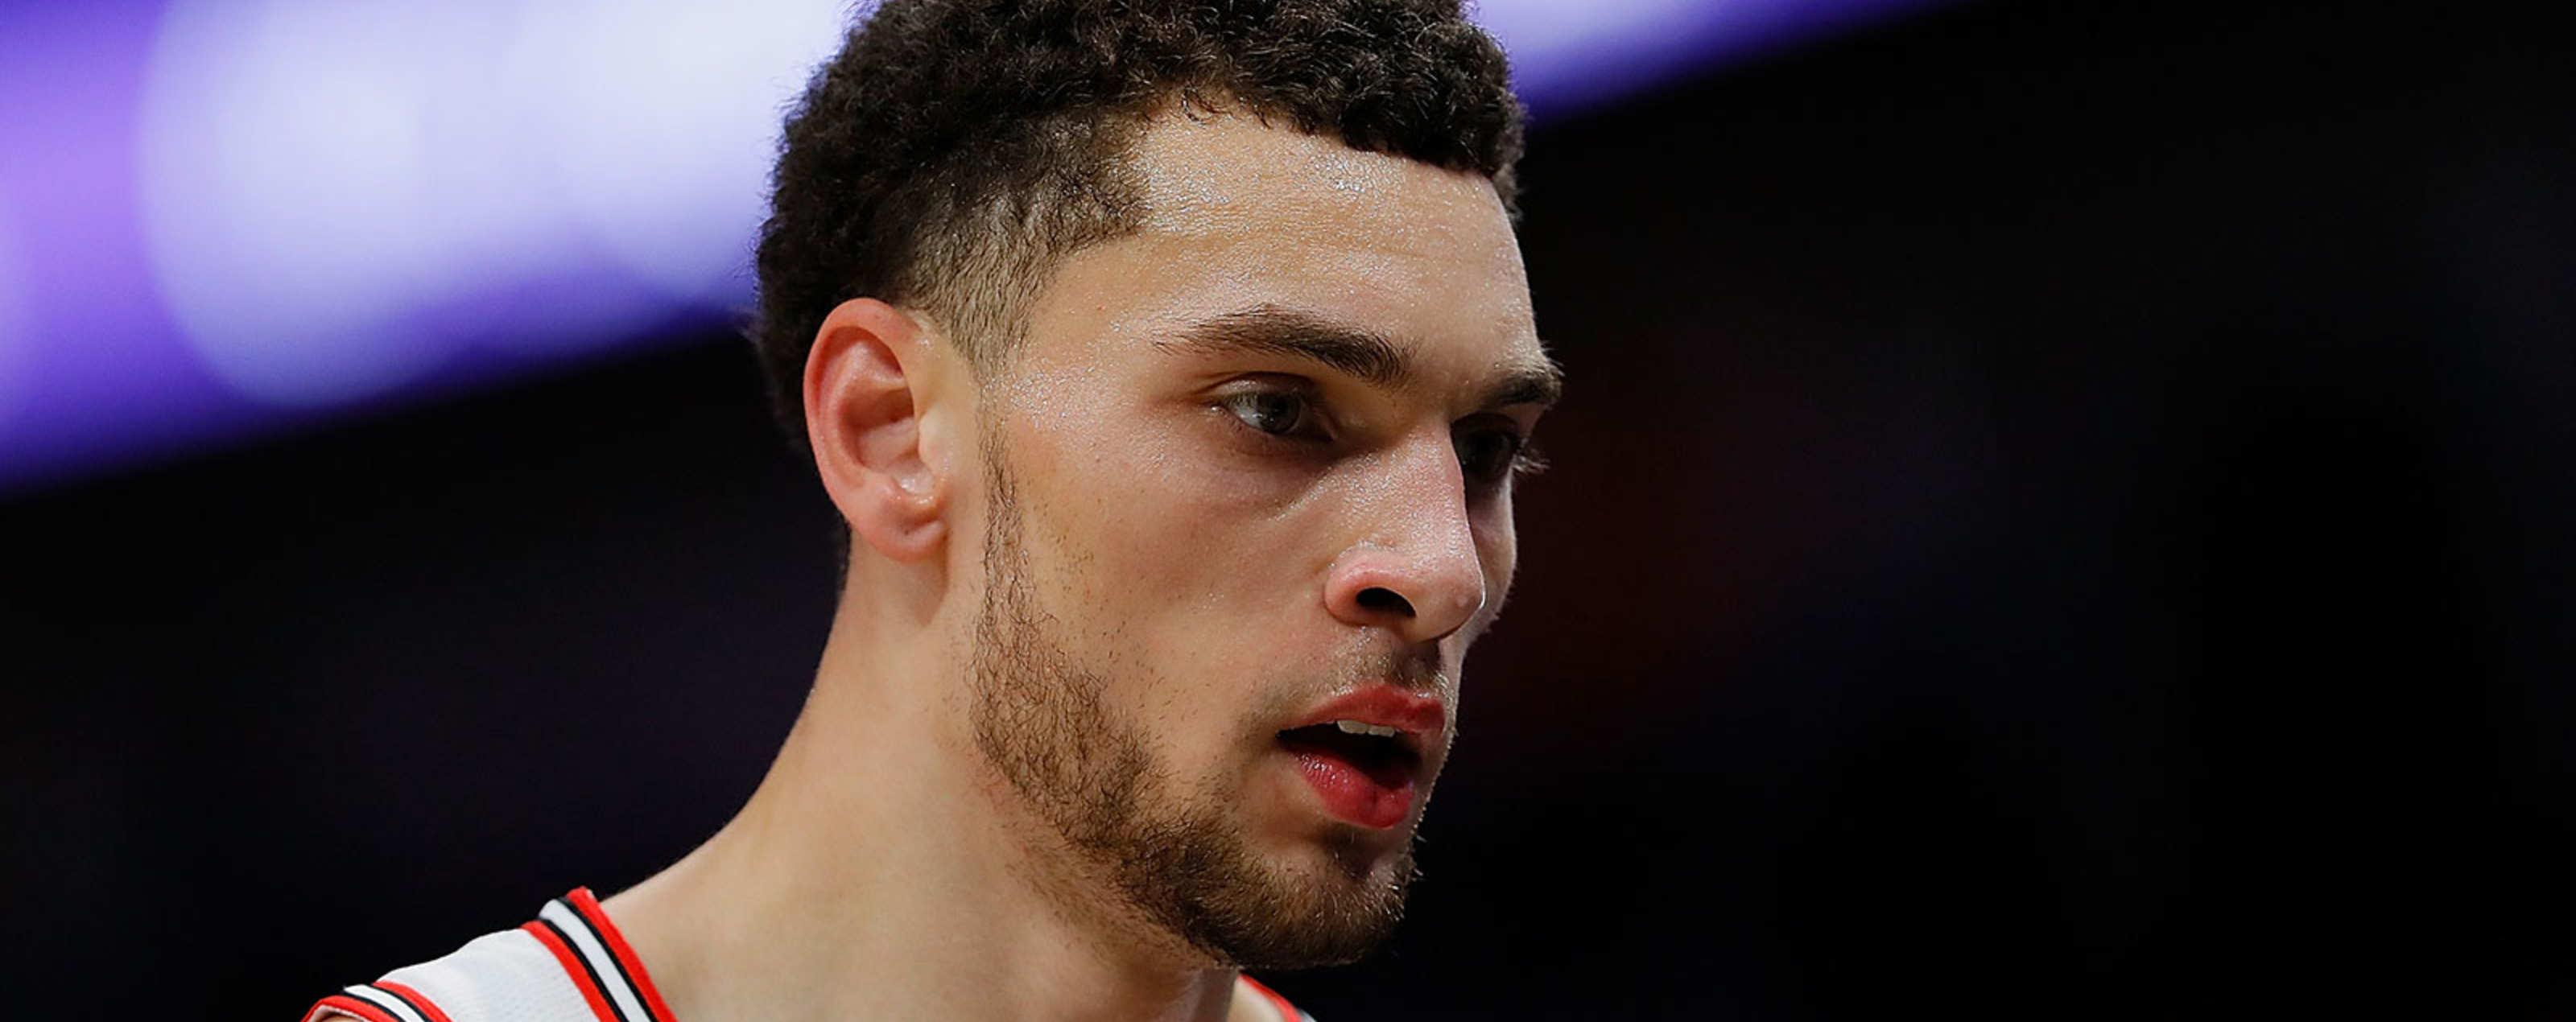 How has Zach LaVine emerged as one of the premier shooting guards